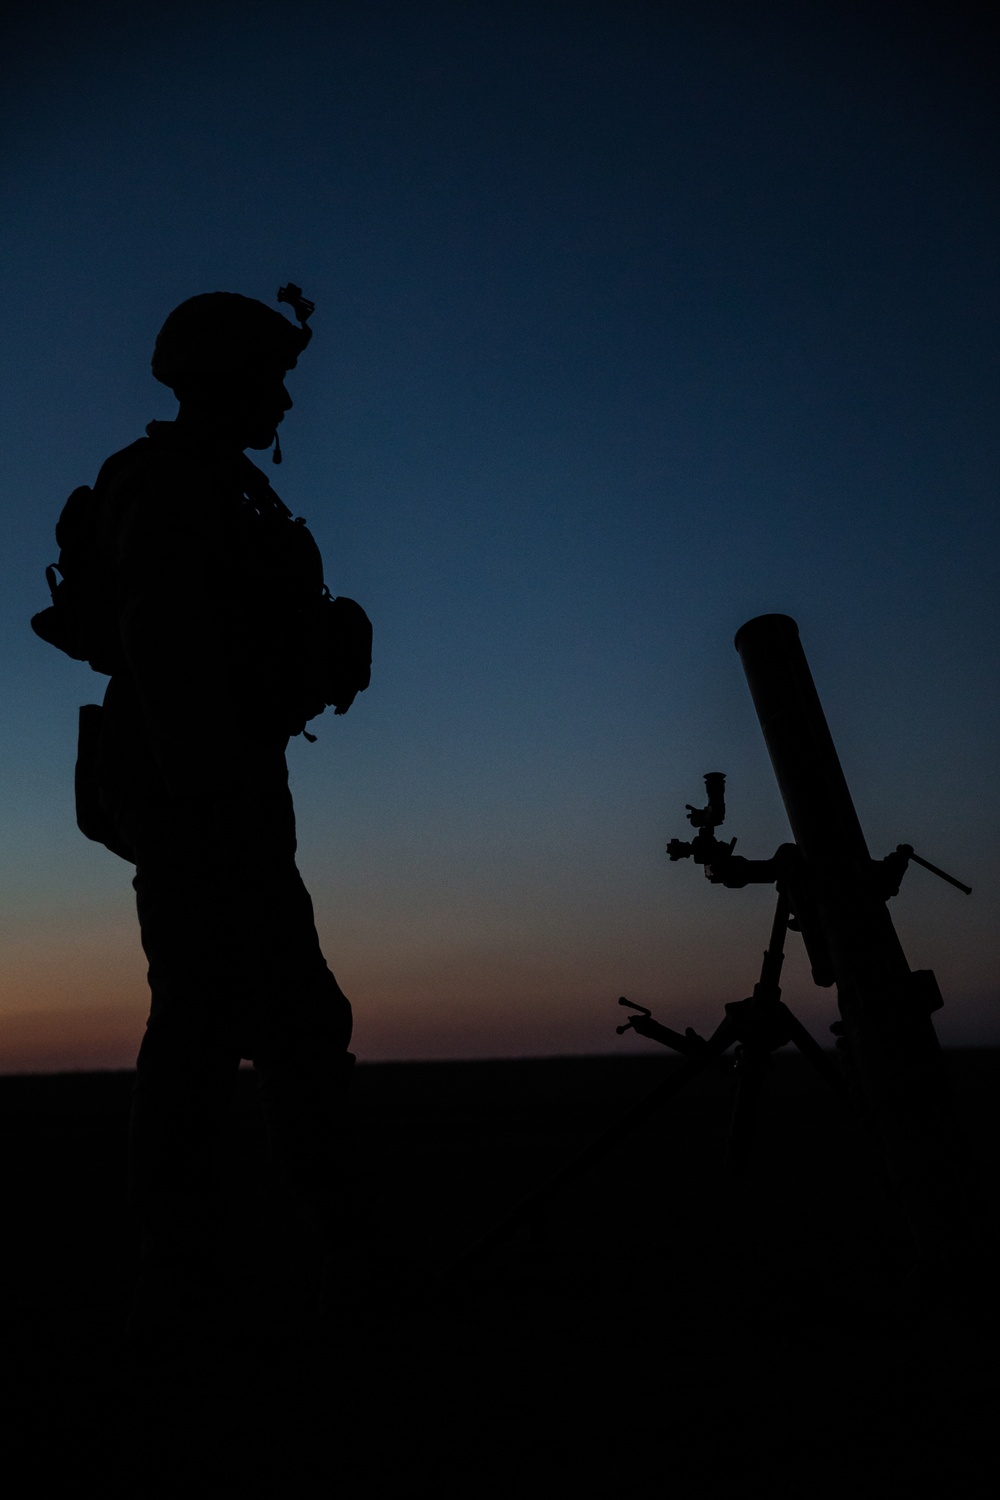 U.S. Marines Support Coalition Operations to Defeat ISIS in Syria